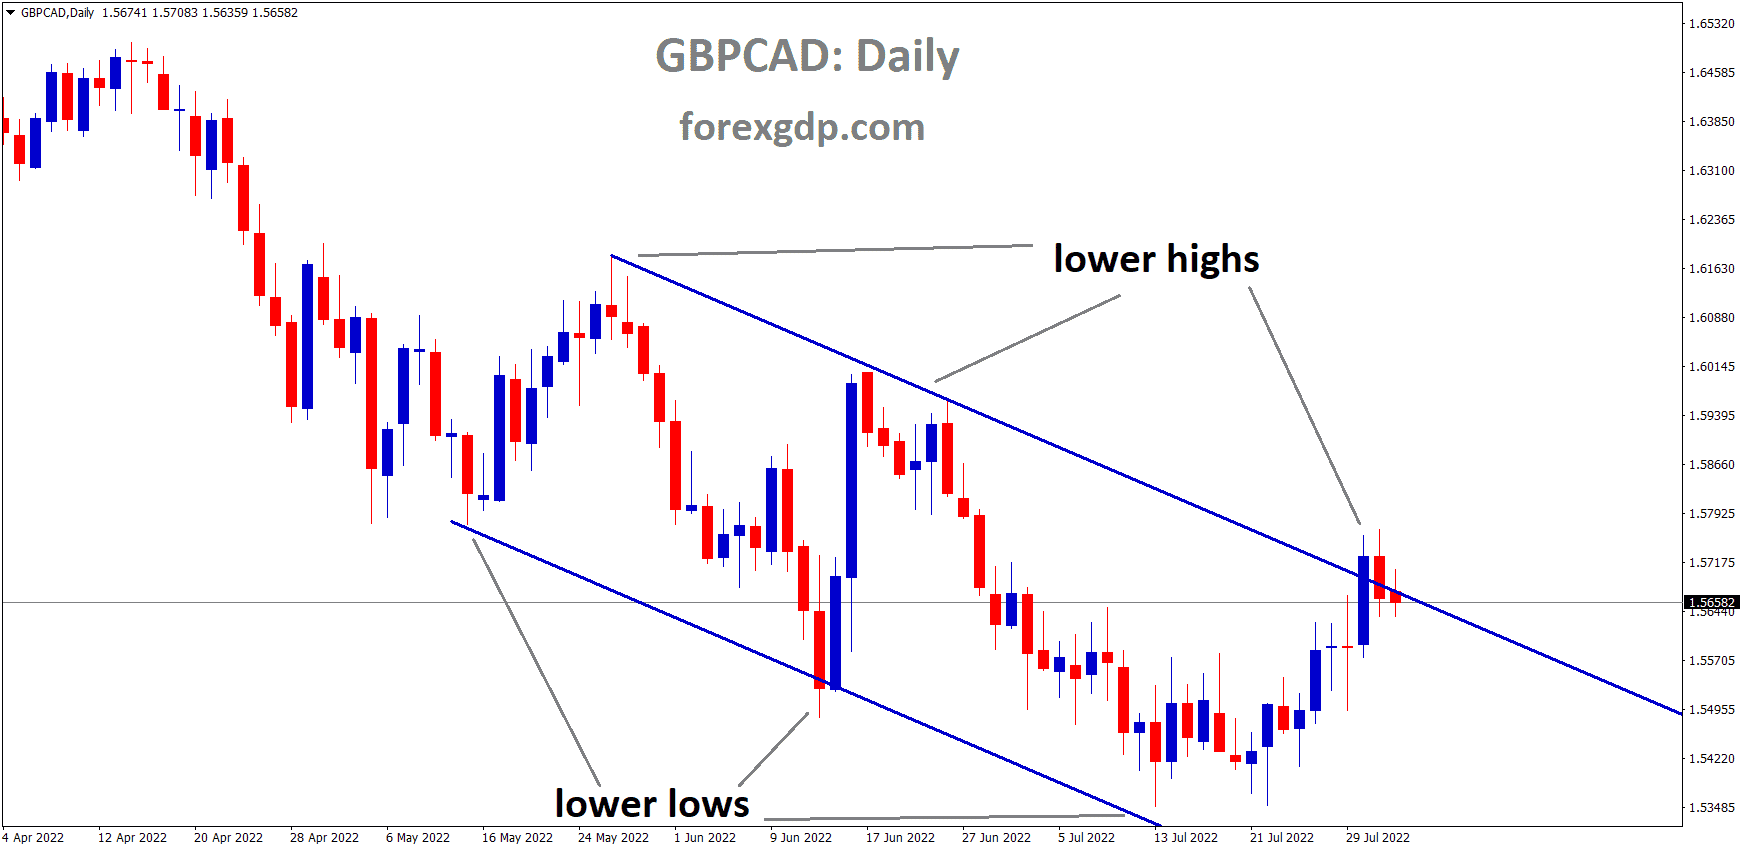 GBPCAD is moving in the Descending channel and the Market has reached the Lower high area of the channel